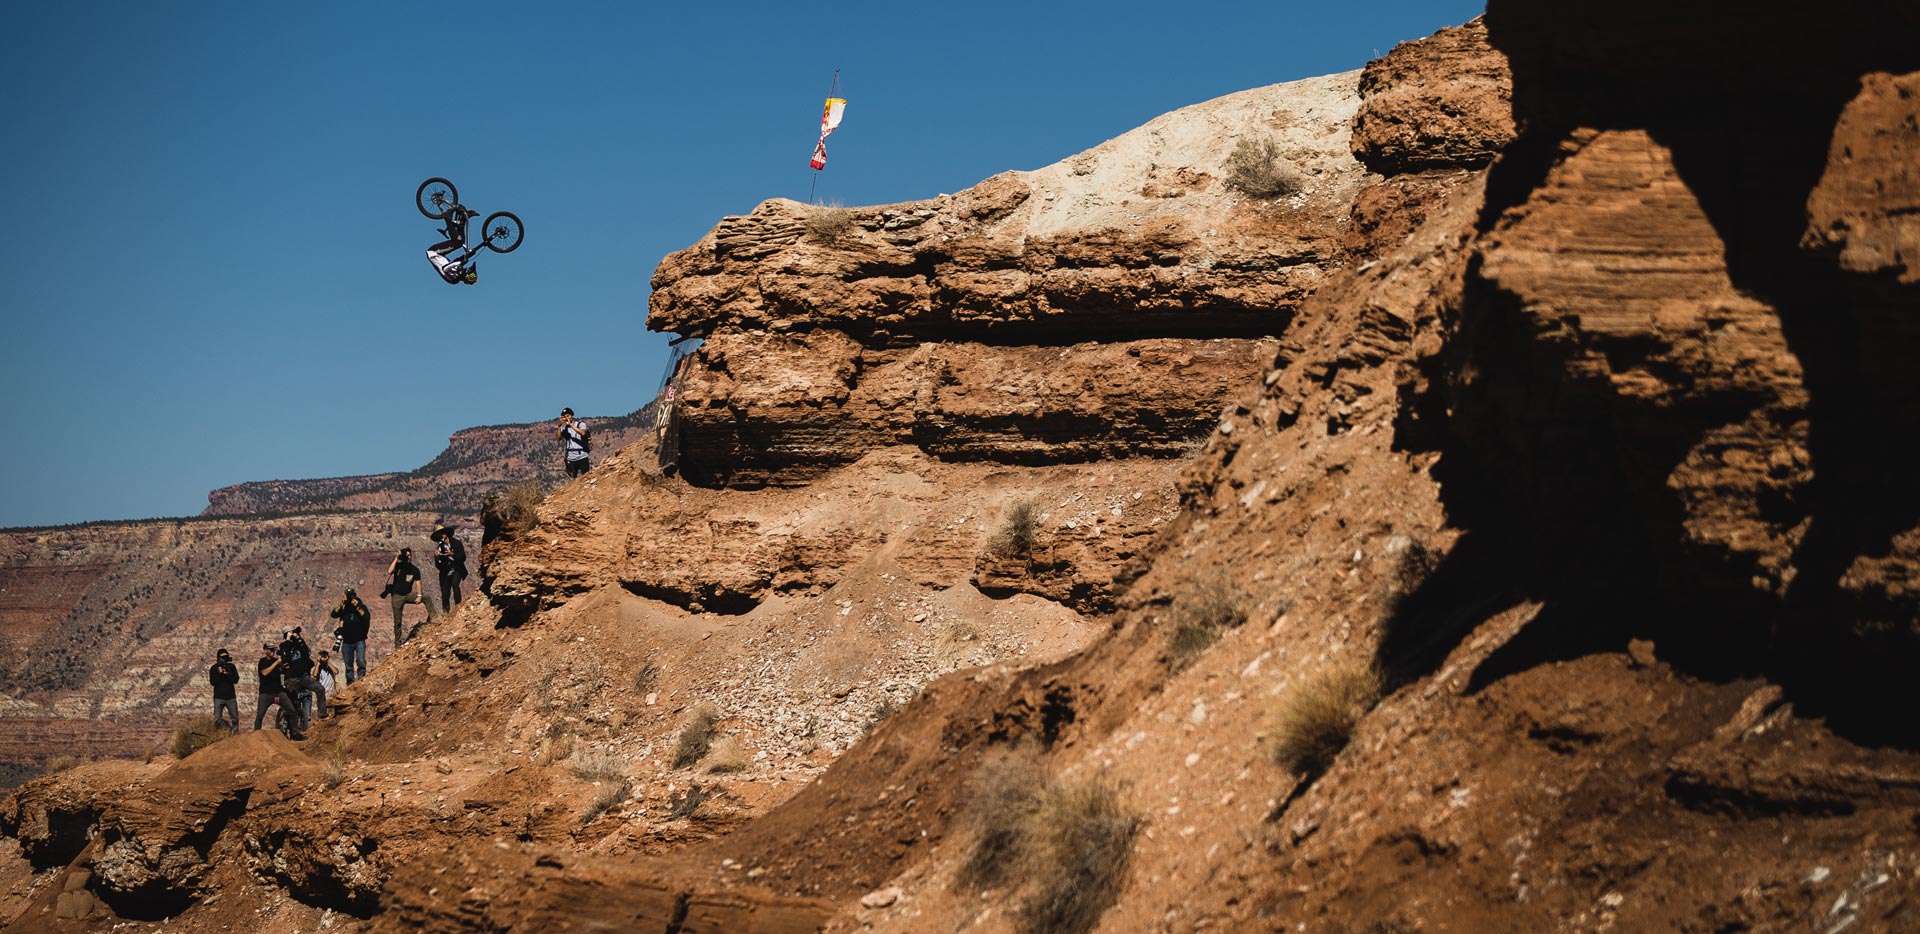 Red Bull Rampage 2022 Tickets On Sale